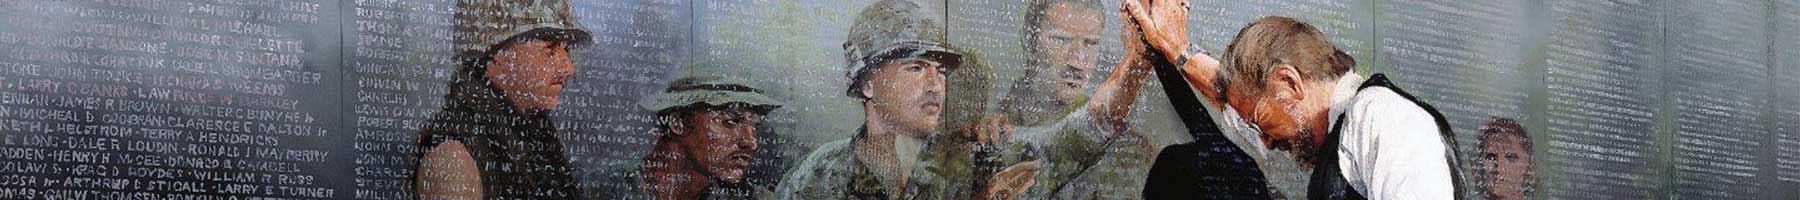 Reflections, painting by Lee Teter of a veteran at the Vietnam Memorial wall 